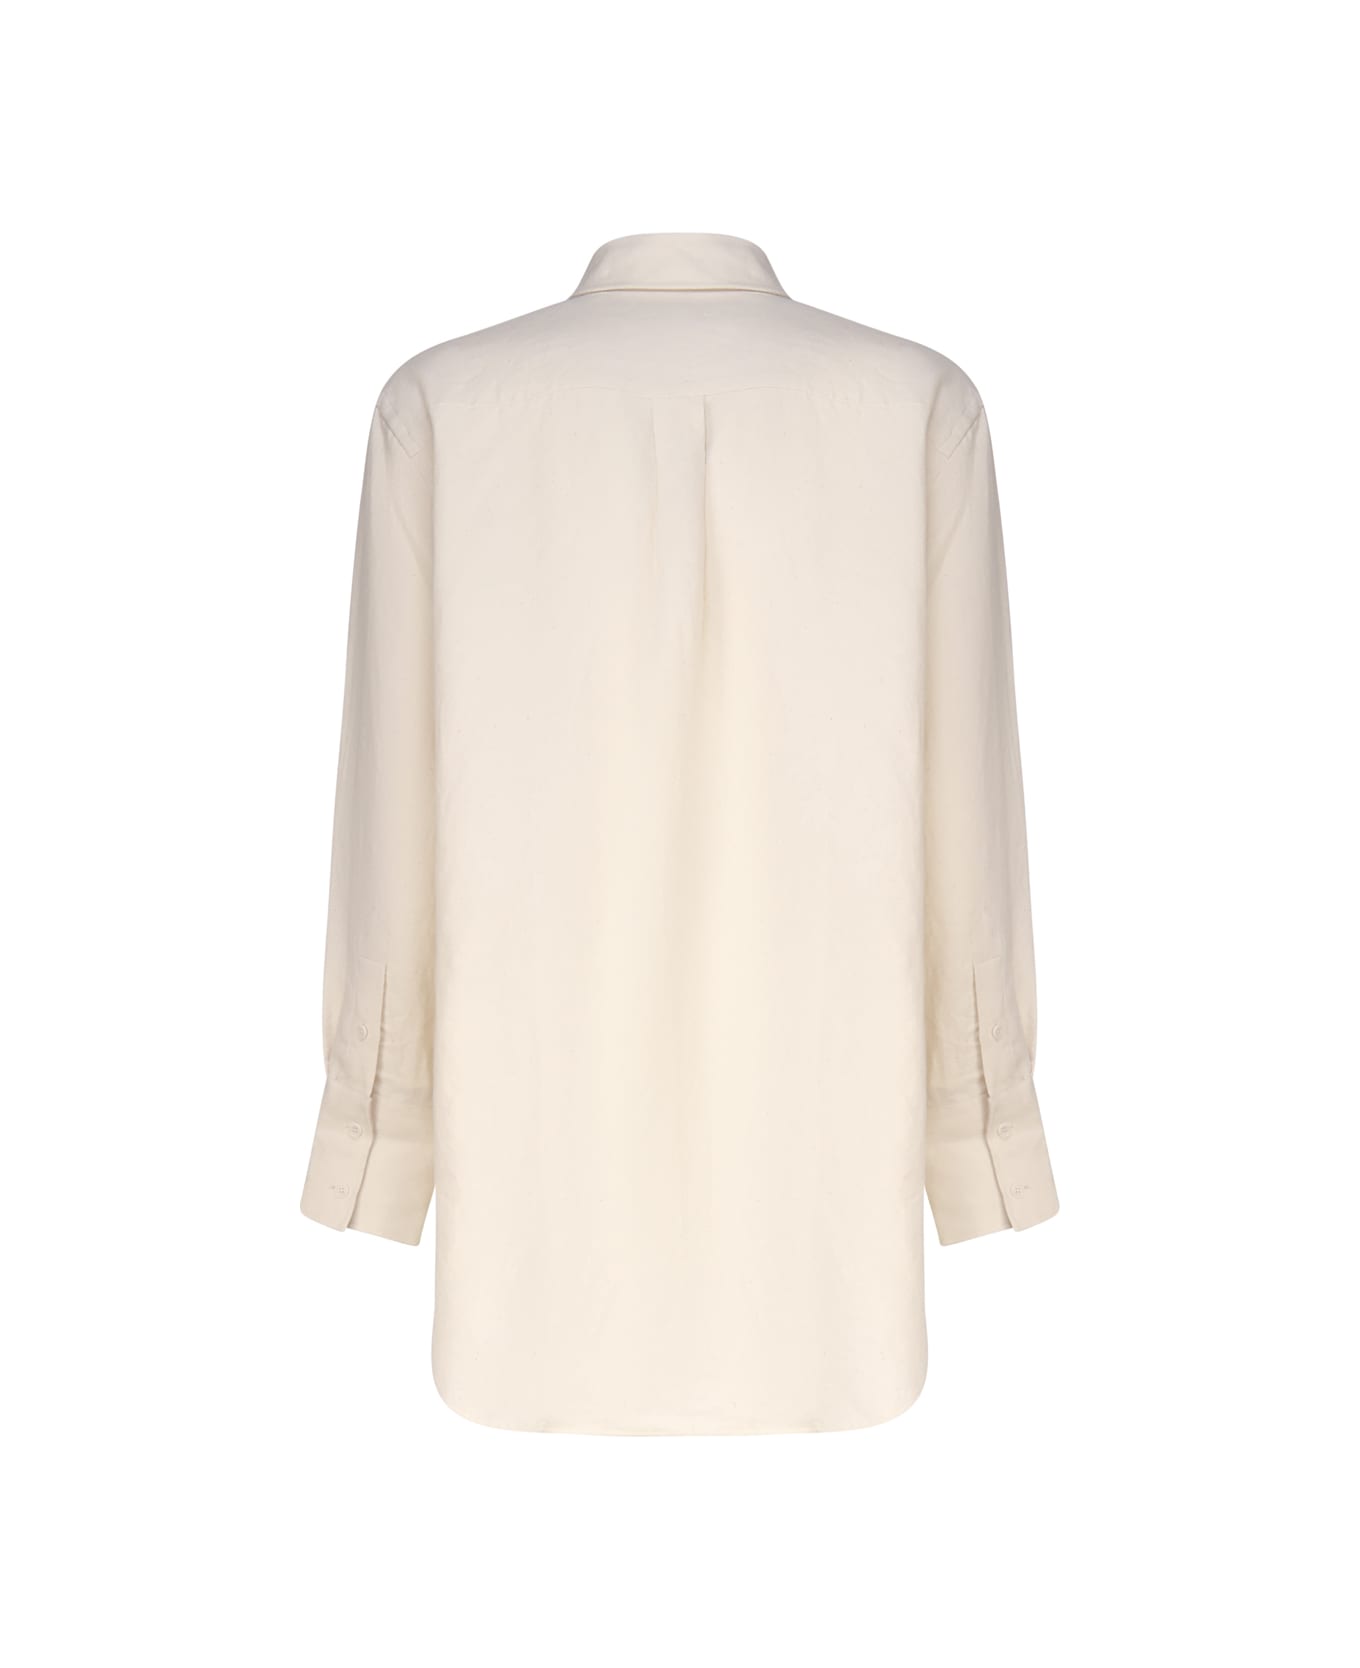 J.W. Anderson Shirt With Anchor Embroidery - Ivory